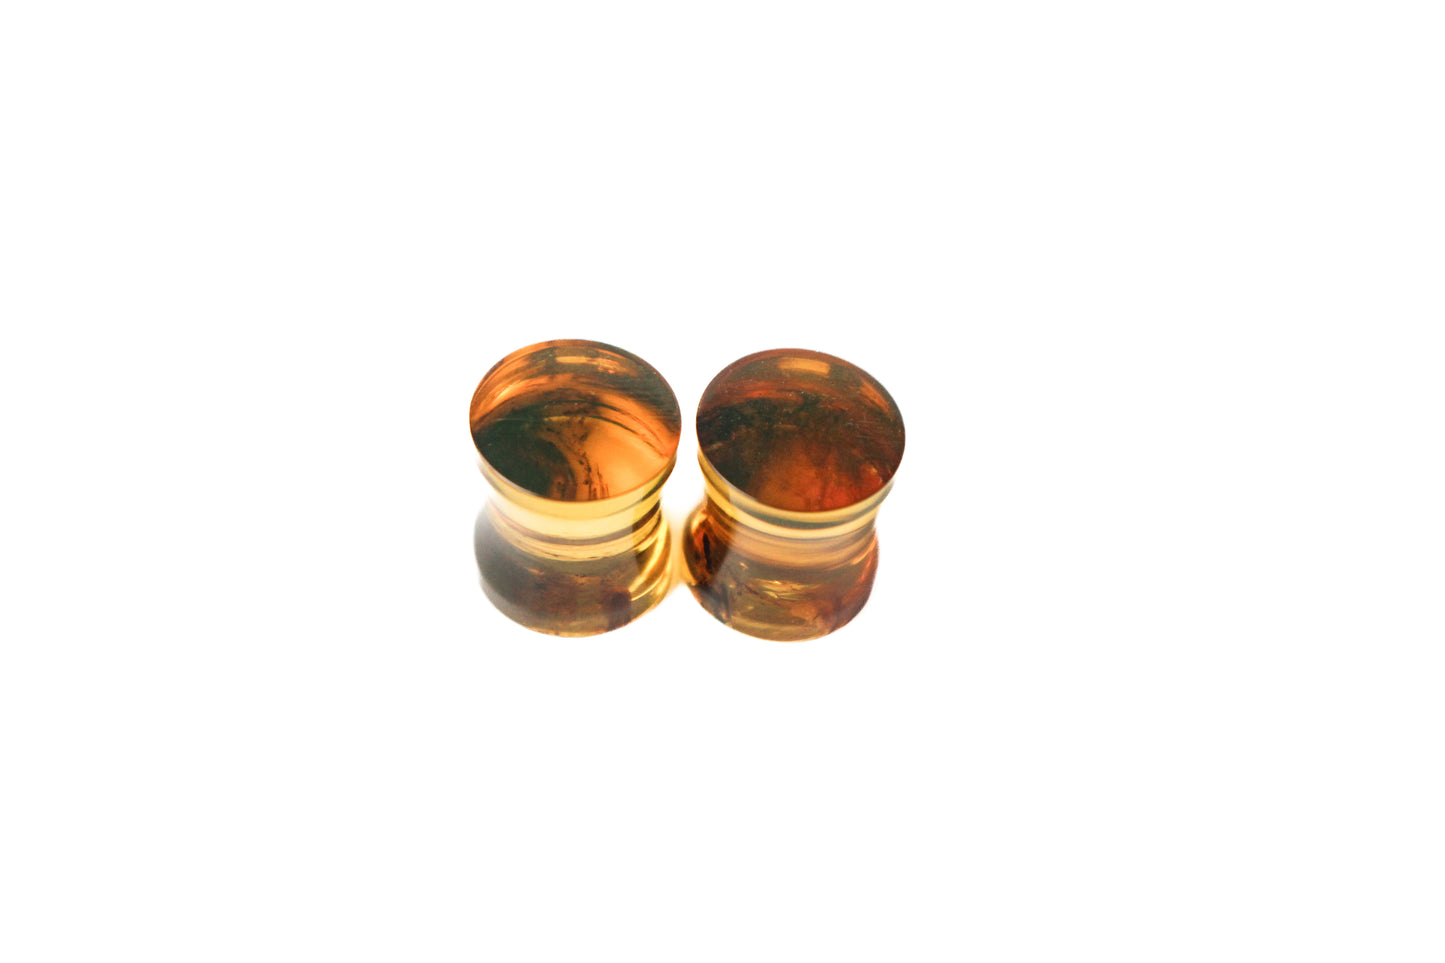 7/16" (11mm) - Chiapas Amber Double Flare Plugs